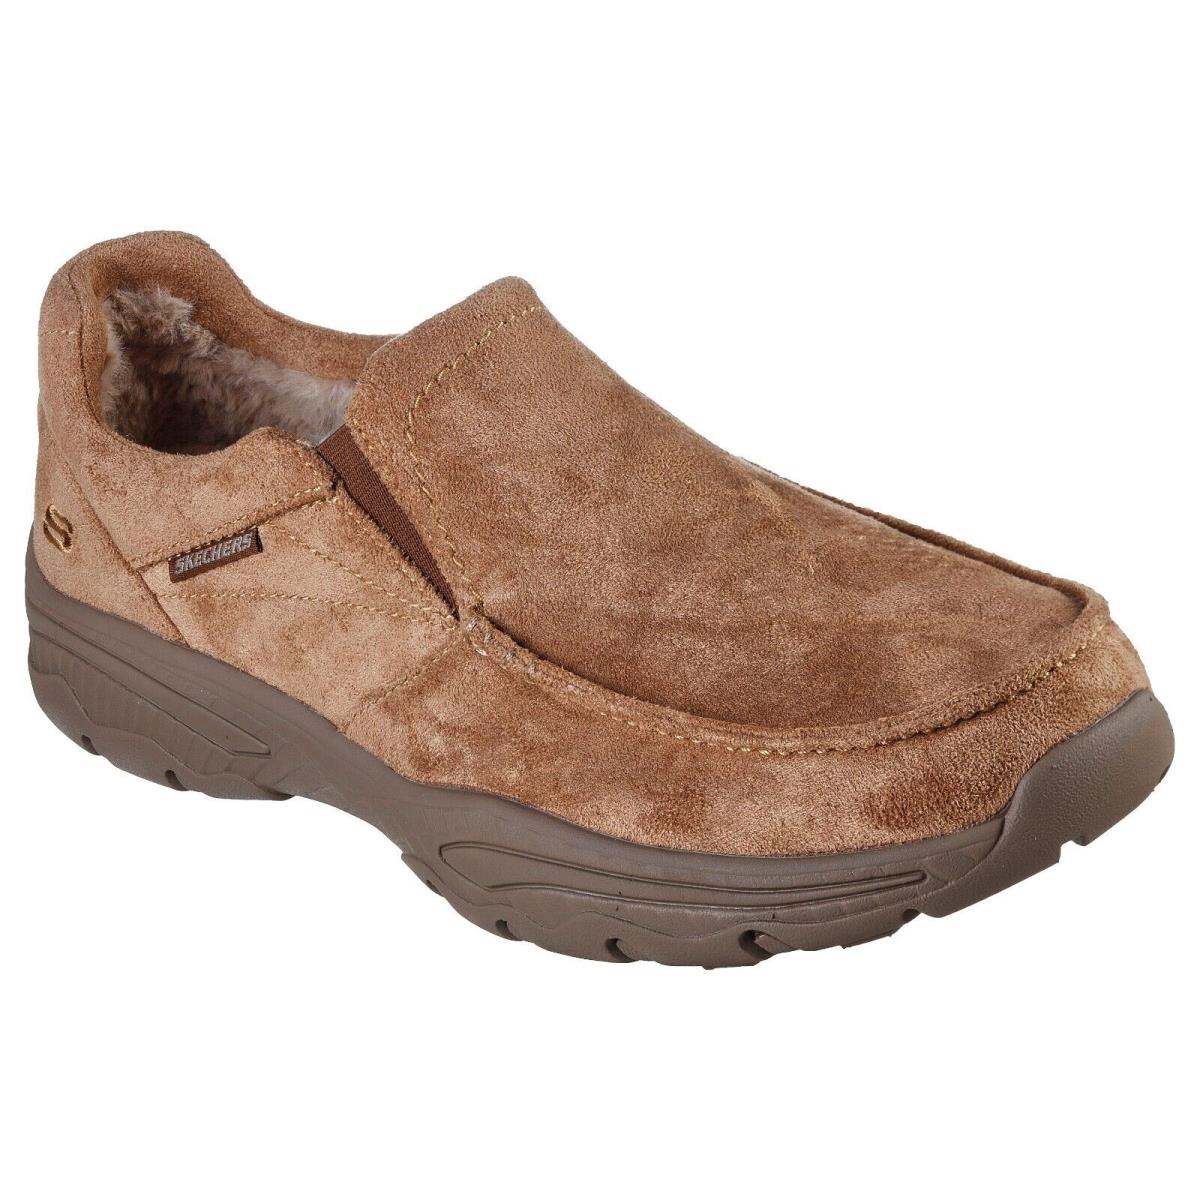 Men`s Skechers Relaxed Fit Creston Garvis Casual Shoes 204403 /tan Multip Sizes